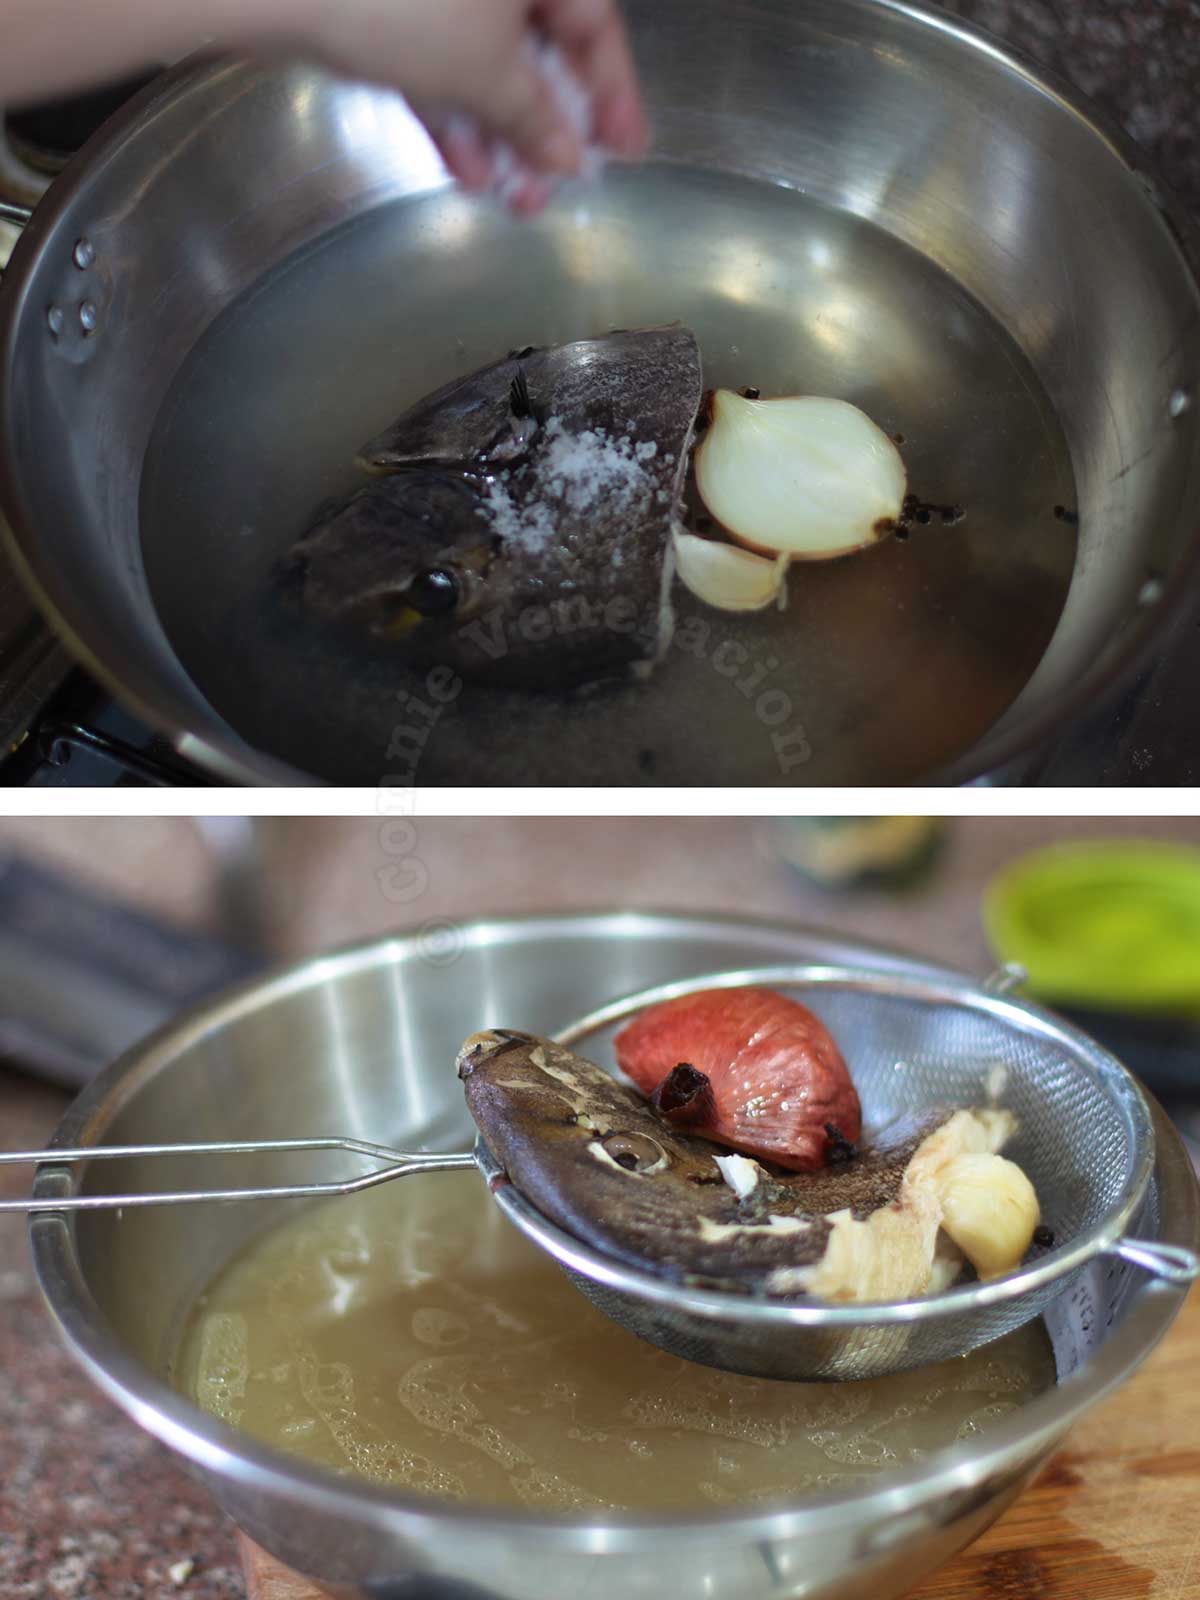 Boiling fish head with spices and straining the broth (cooking liquid)